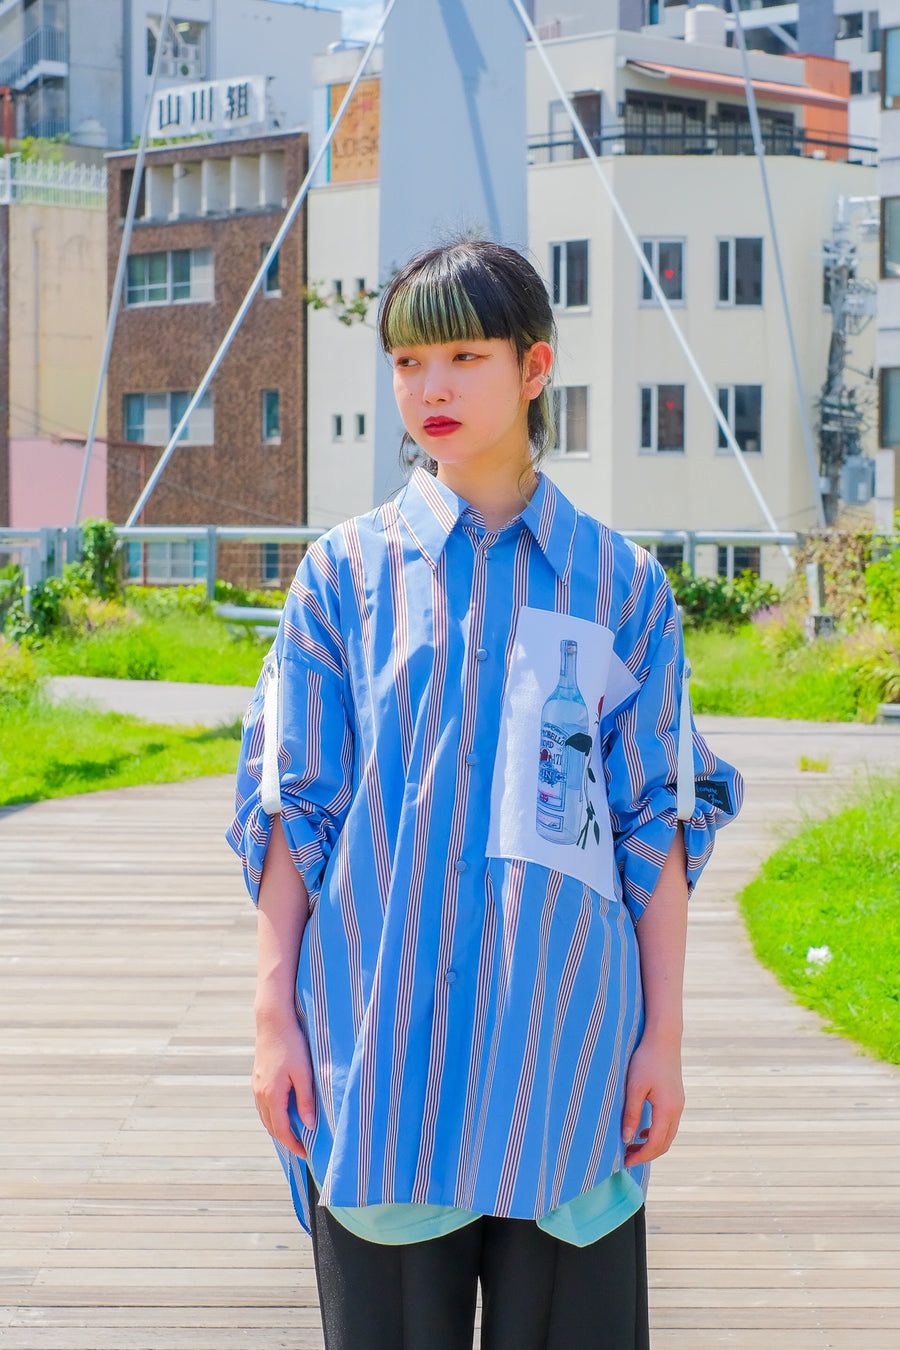 SYU.HOMME/FEMM  Patched long sleeve shirts（WHITE/BROWN)